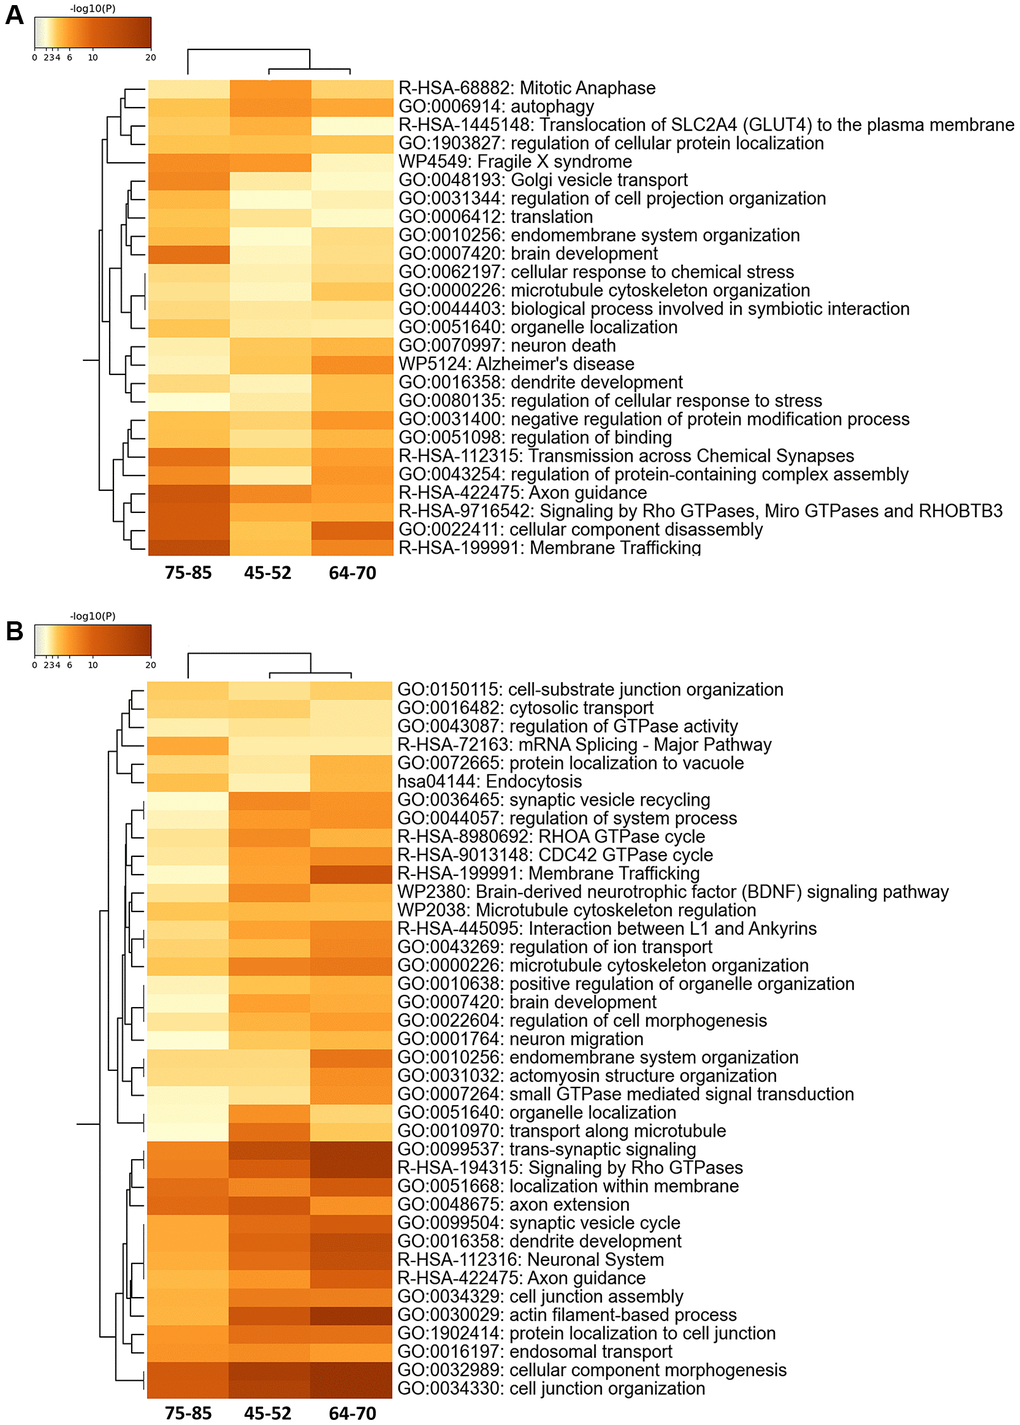 Enriched ontology clusters in the 30% FC differential proteomes (A) and phosphoproteomes (B) during aging using Metascape. After identification of all statistically enriched terms, cumulative hypergeometric p-values and enrichment factors were calculated and used for filtering. The remaining significant terms were then hierarchically clustered into a tree based on Kappa-statistical similarities among their gene memberships. Then, a 0.3 kappa score was applied as the threshold to cast the tree into term clusters. The term with the best p-value within each cluster was selected as its representative term and displayed in a dendrogram.